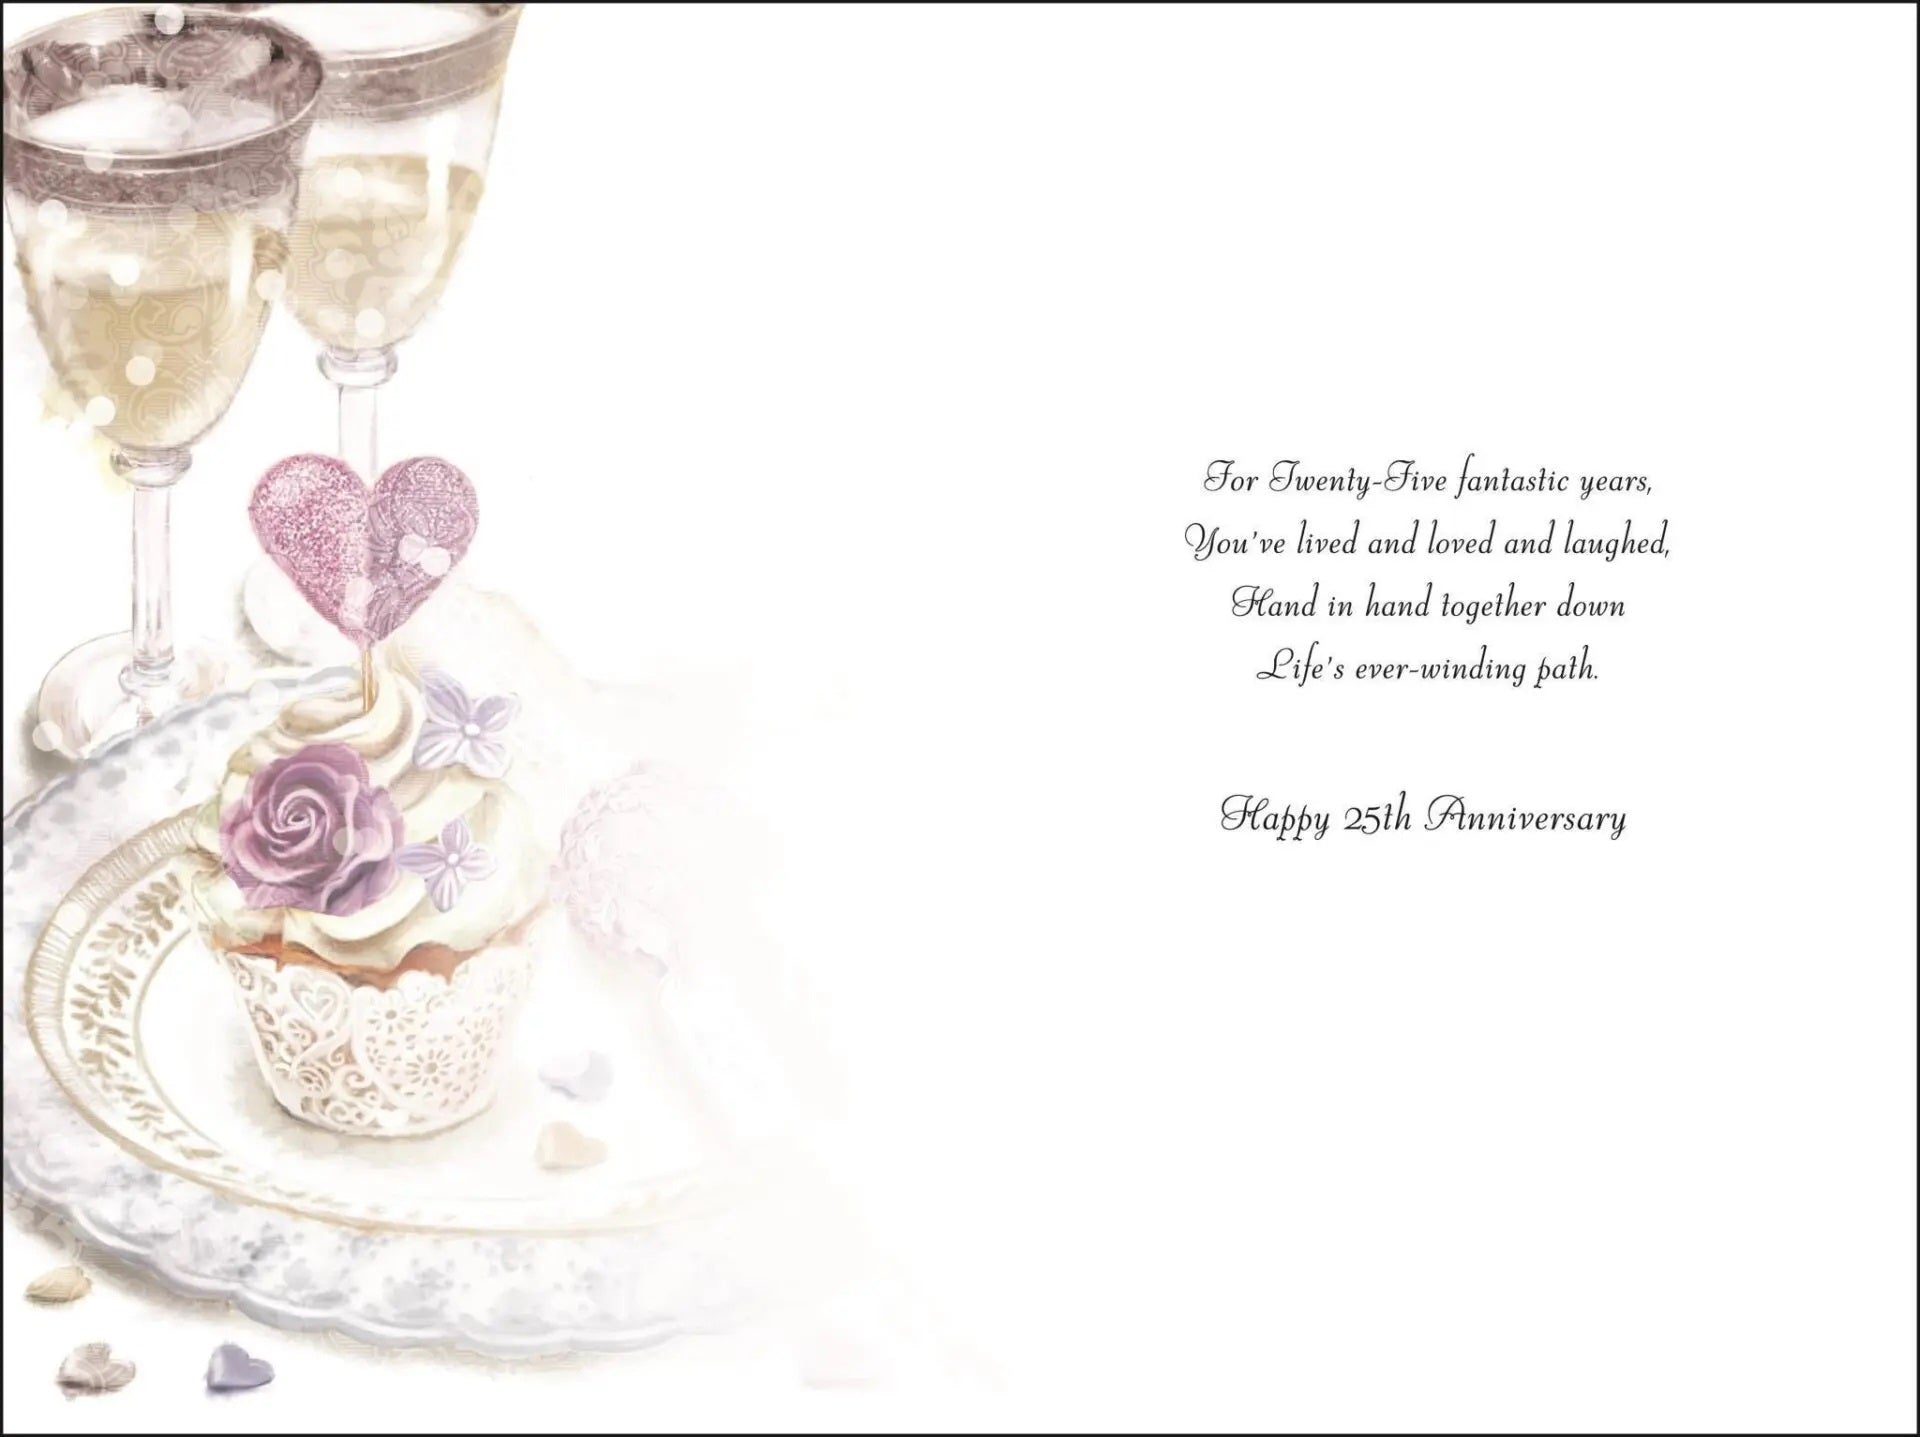 25th Wedding Anniversary Card -  Champagne, Cake Knife, And Platter